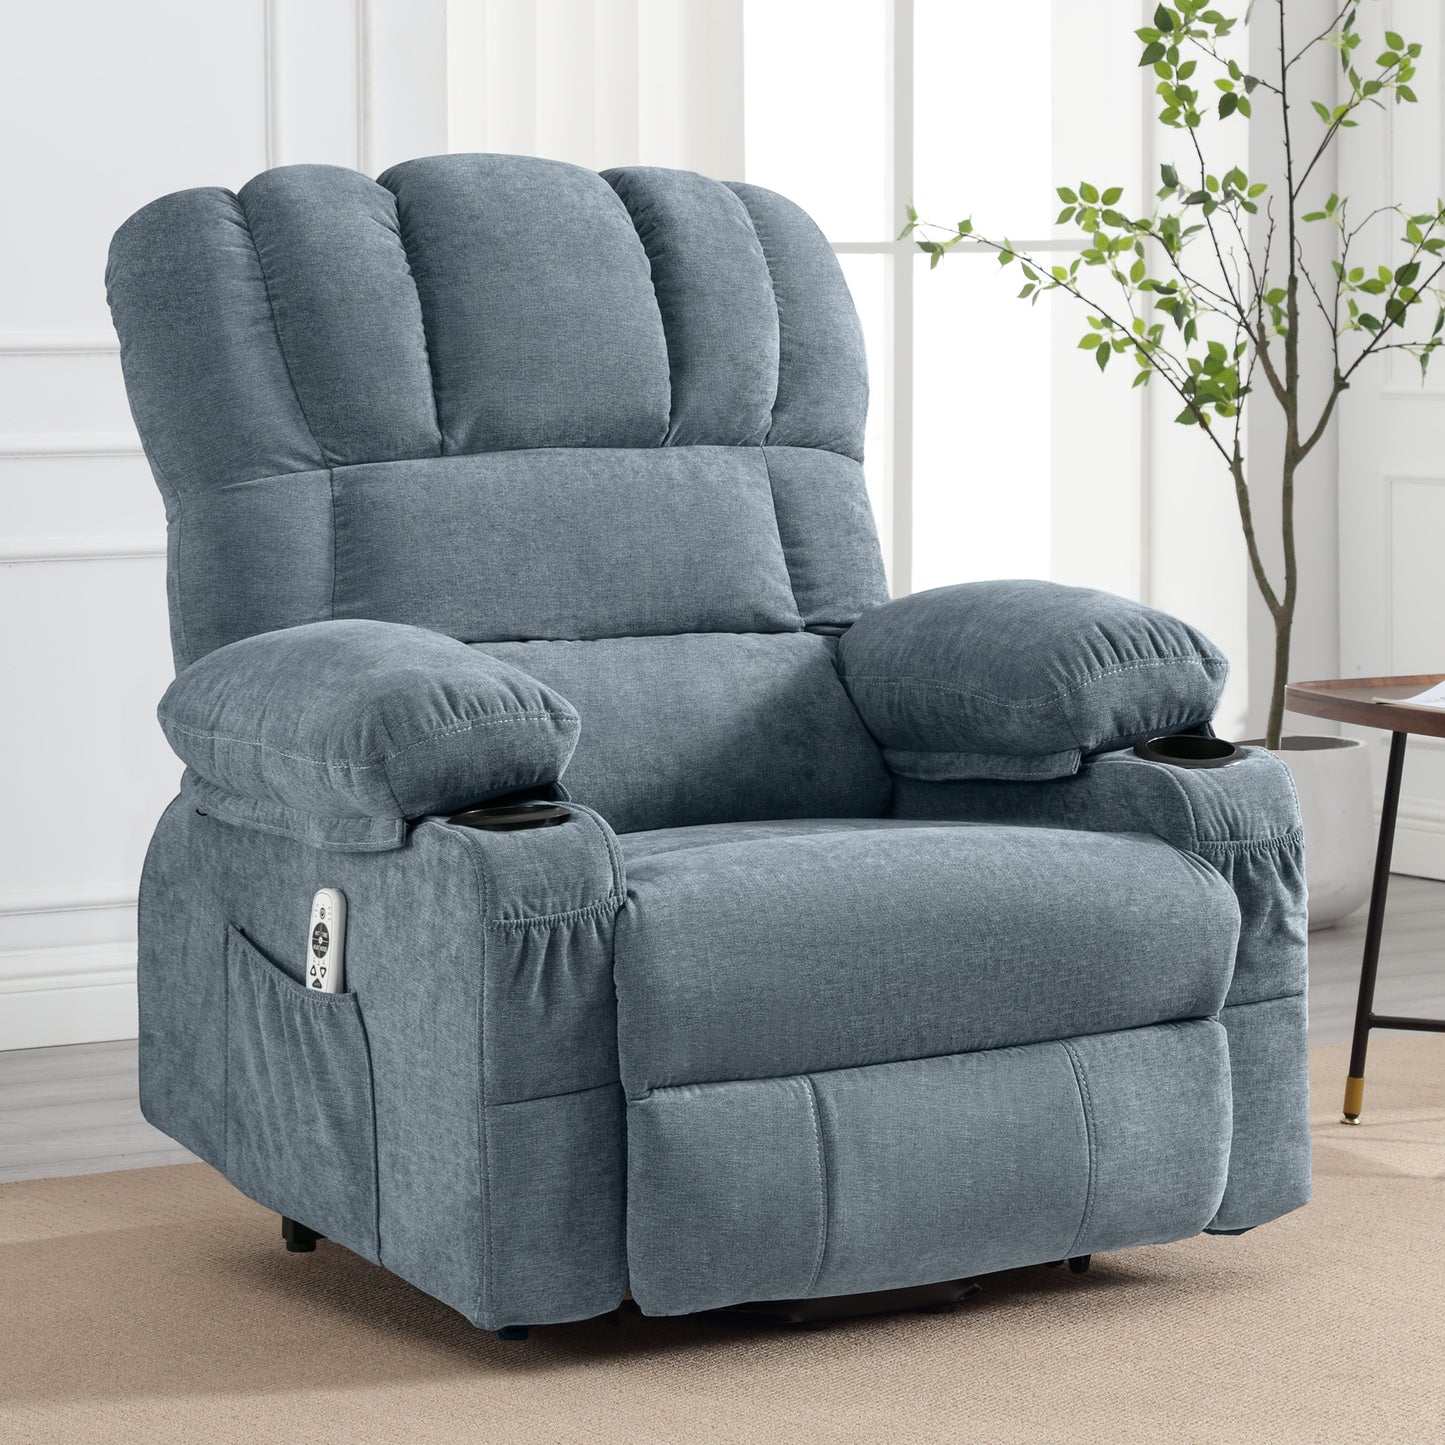 HSUNNS Power Lift Recliner Chair with Heat and Vibration Massage, Fabric Elderly Oversized Reclining Sofa with USB Charge Port, Cup Holders and Side Pockets for Bedroom Home Theater, Blue